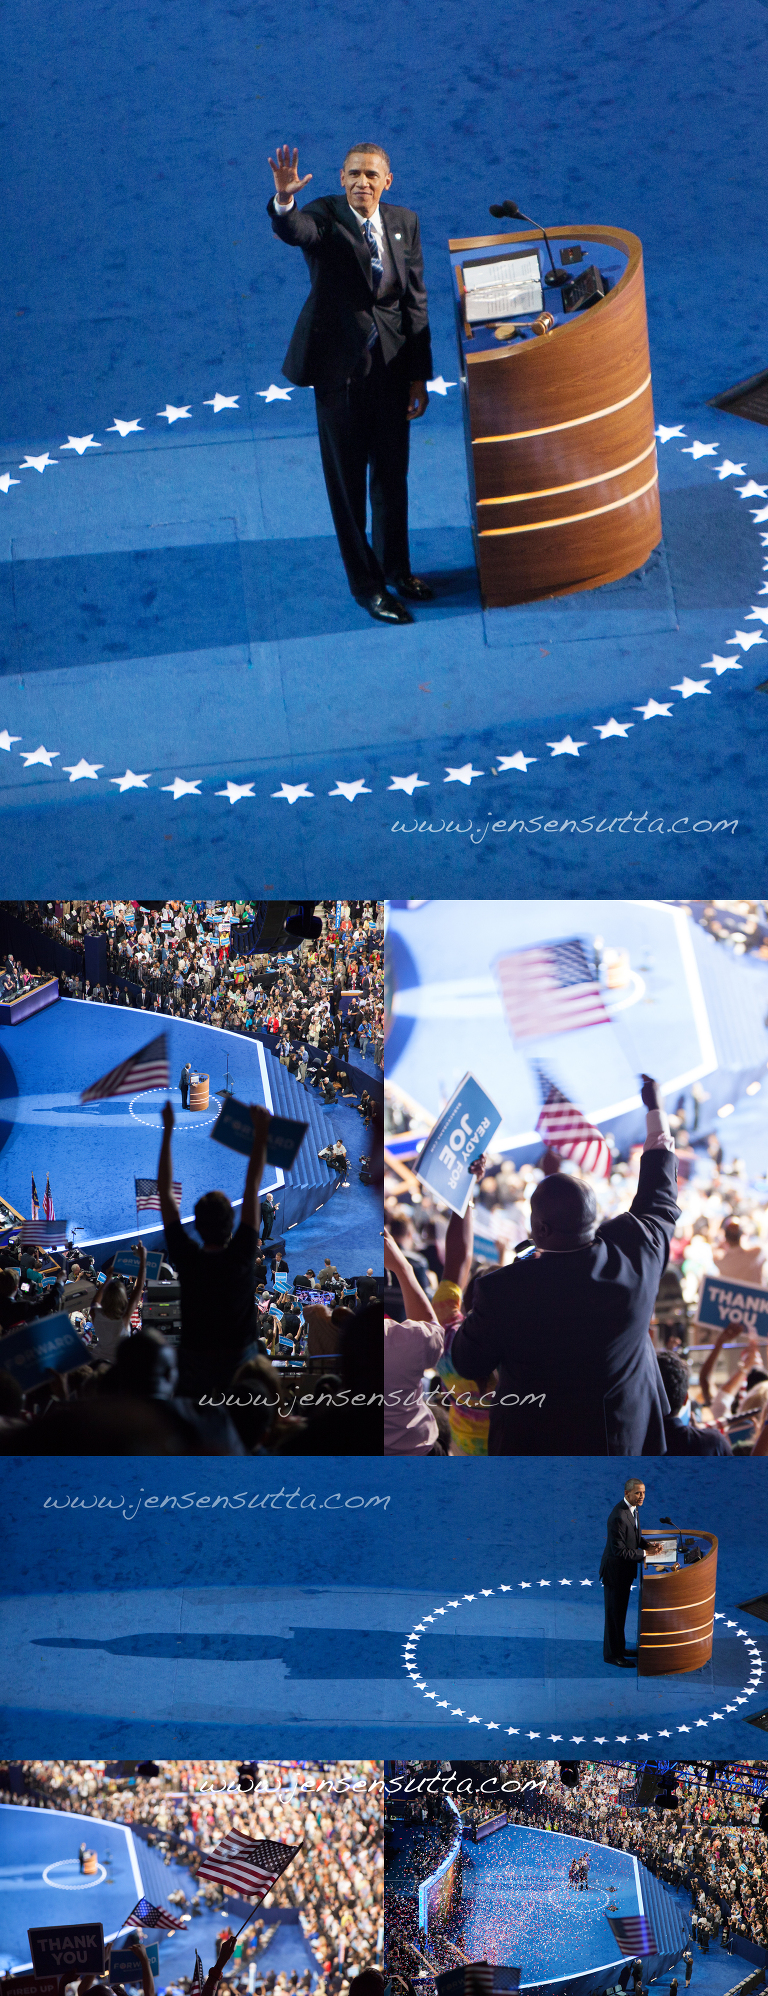 President Barack Obama addresses crowd at the 2012 Democratic National Convention